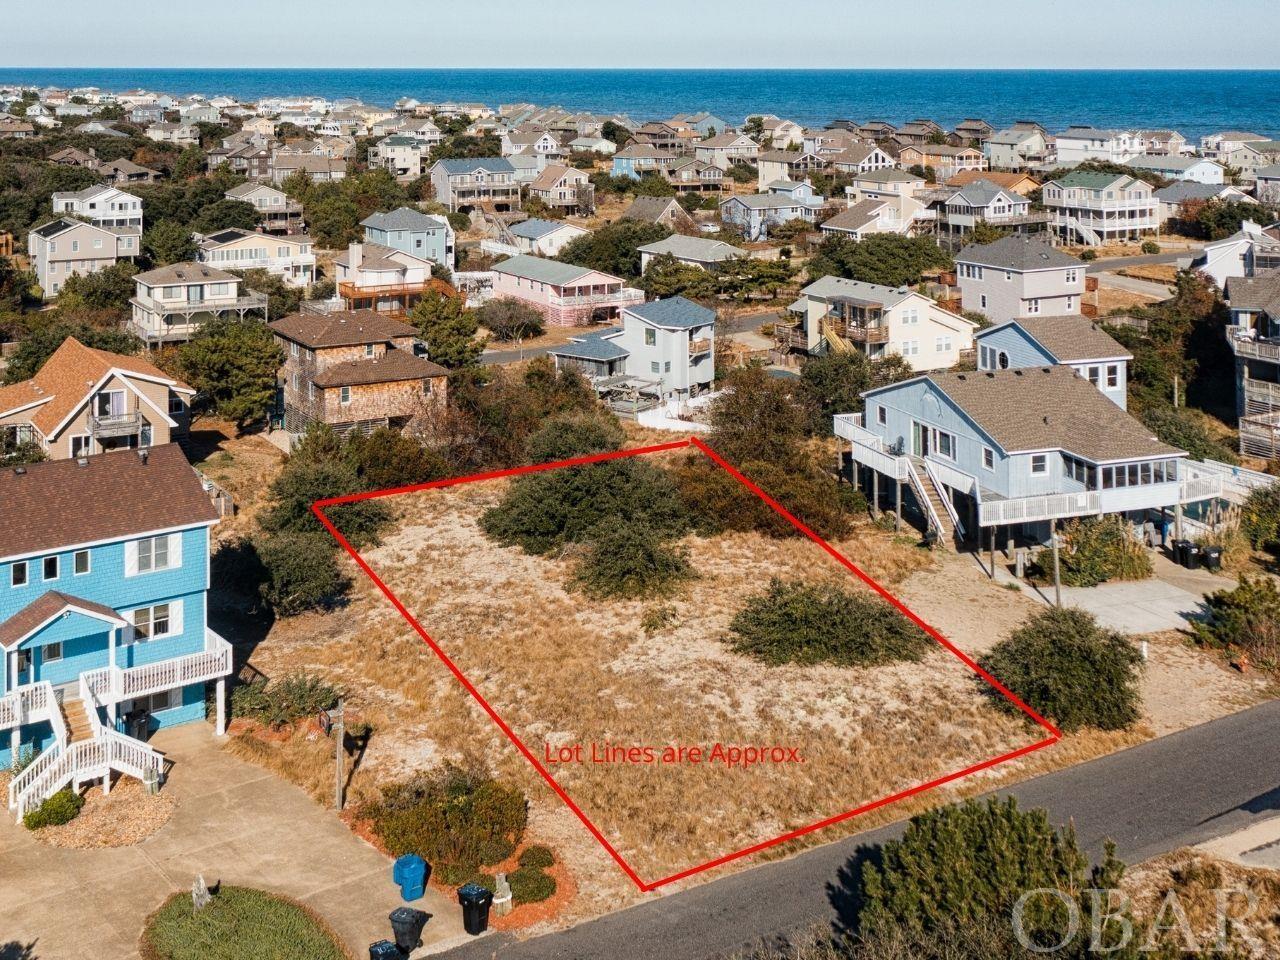 Build the beach home of your dreams on this charming street located in the sought after ocean to sound community of Duck, Carolina Dunes. This highly elevated parcel is the perfect location and size to accommodate a second home, investment property, or full-time residence. Offering direct beach and sound access, paved streets, and close proximity to water with the likelihood of views from a future home built. Enjoy the convenience of Ducks locally owned & operated shops and attractions just steps away.